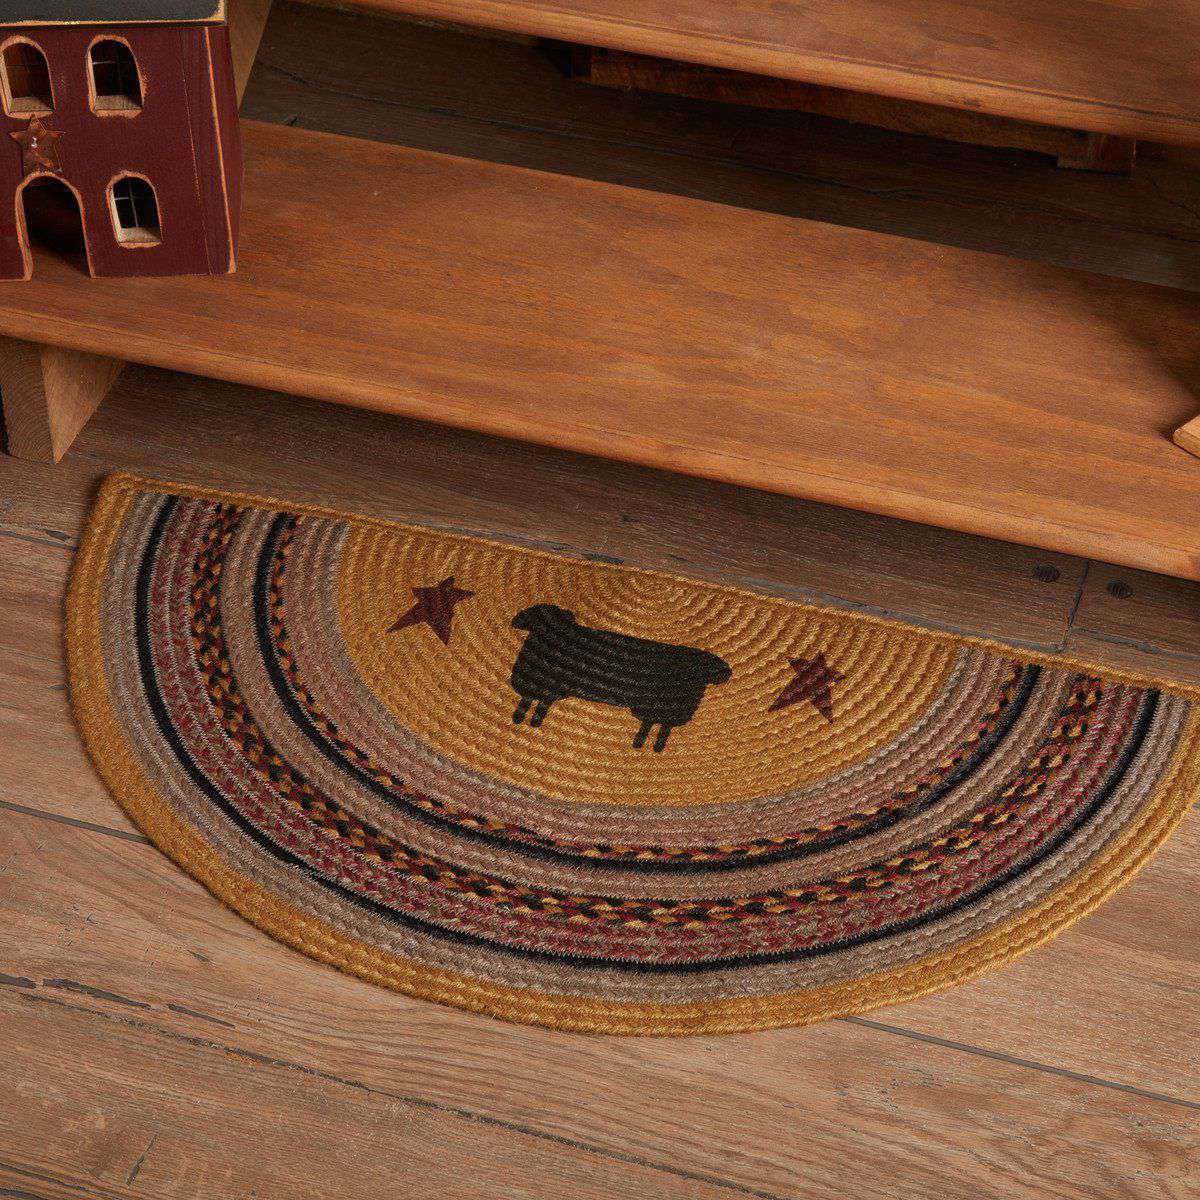 Heritage Farms Sheep Jute Braided Rug Oval/Half Circle rugs VHC Brands 